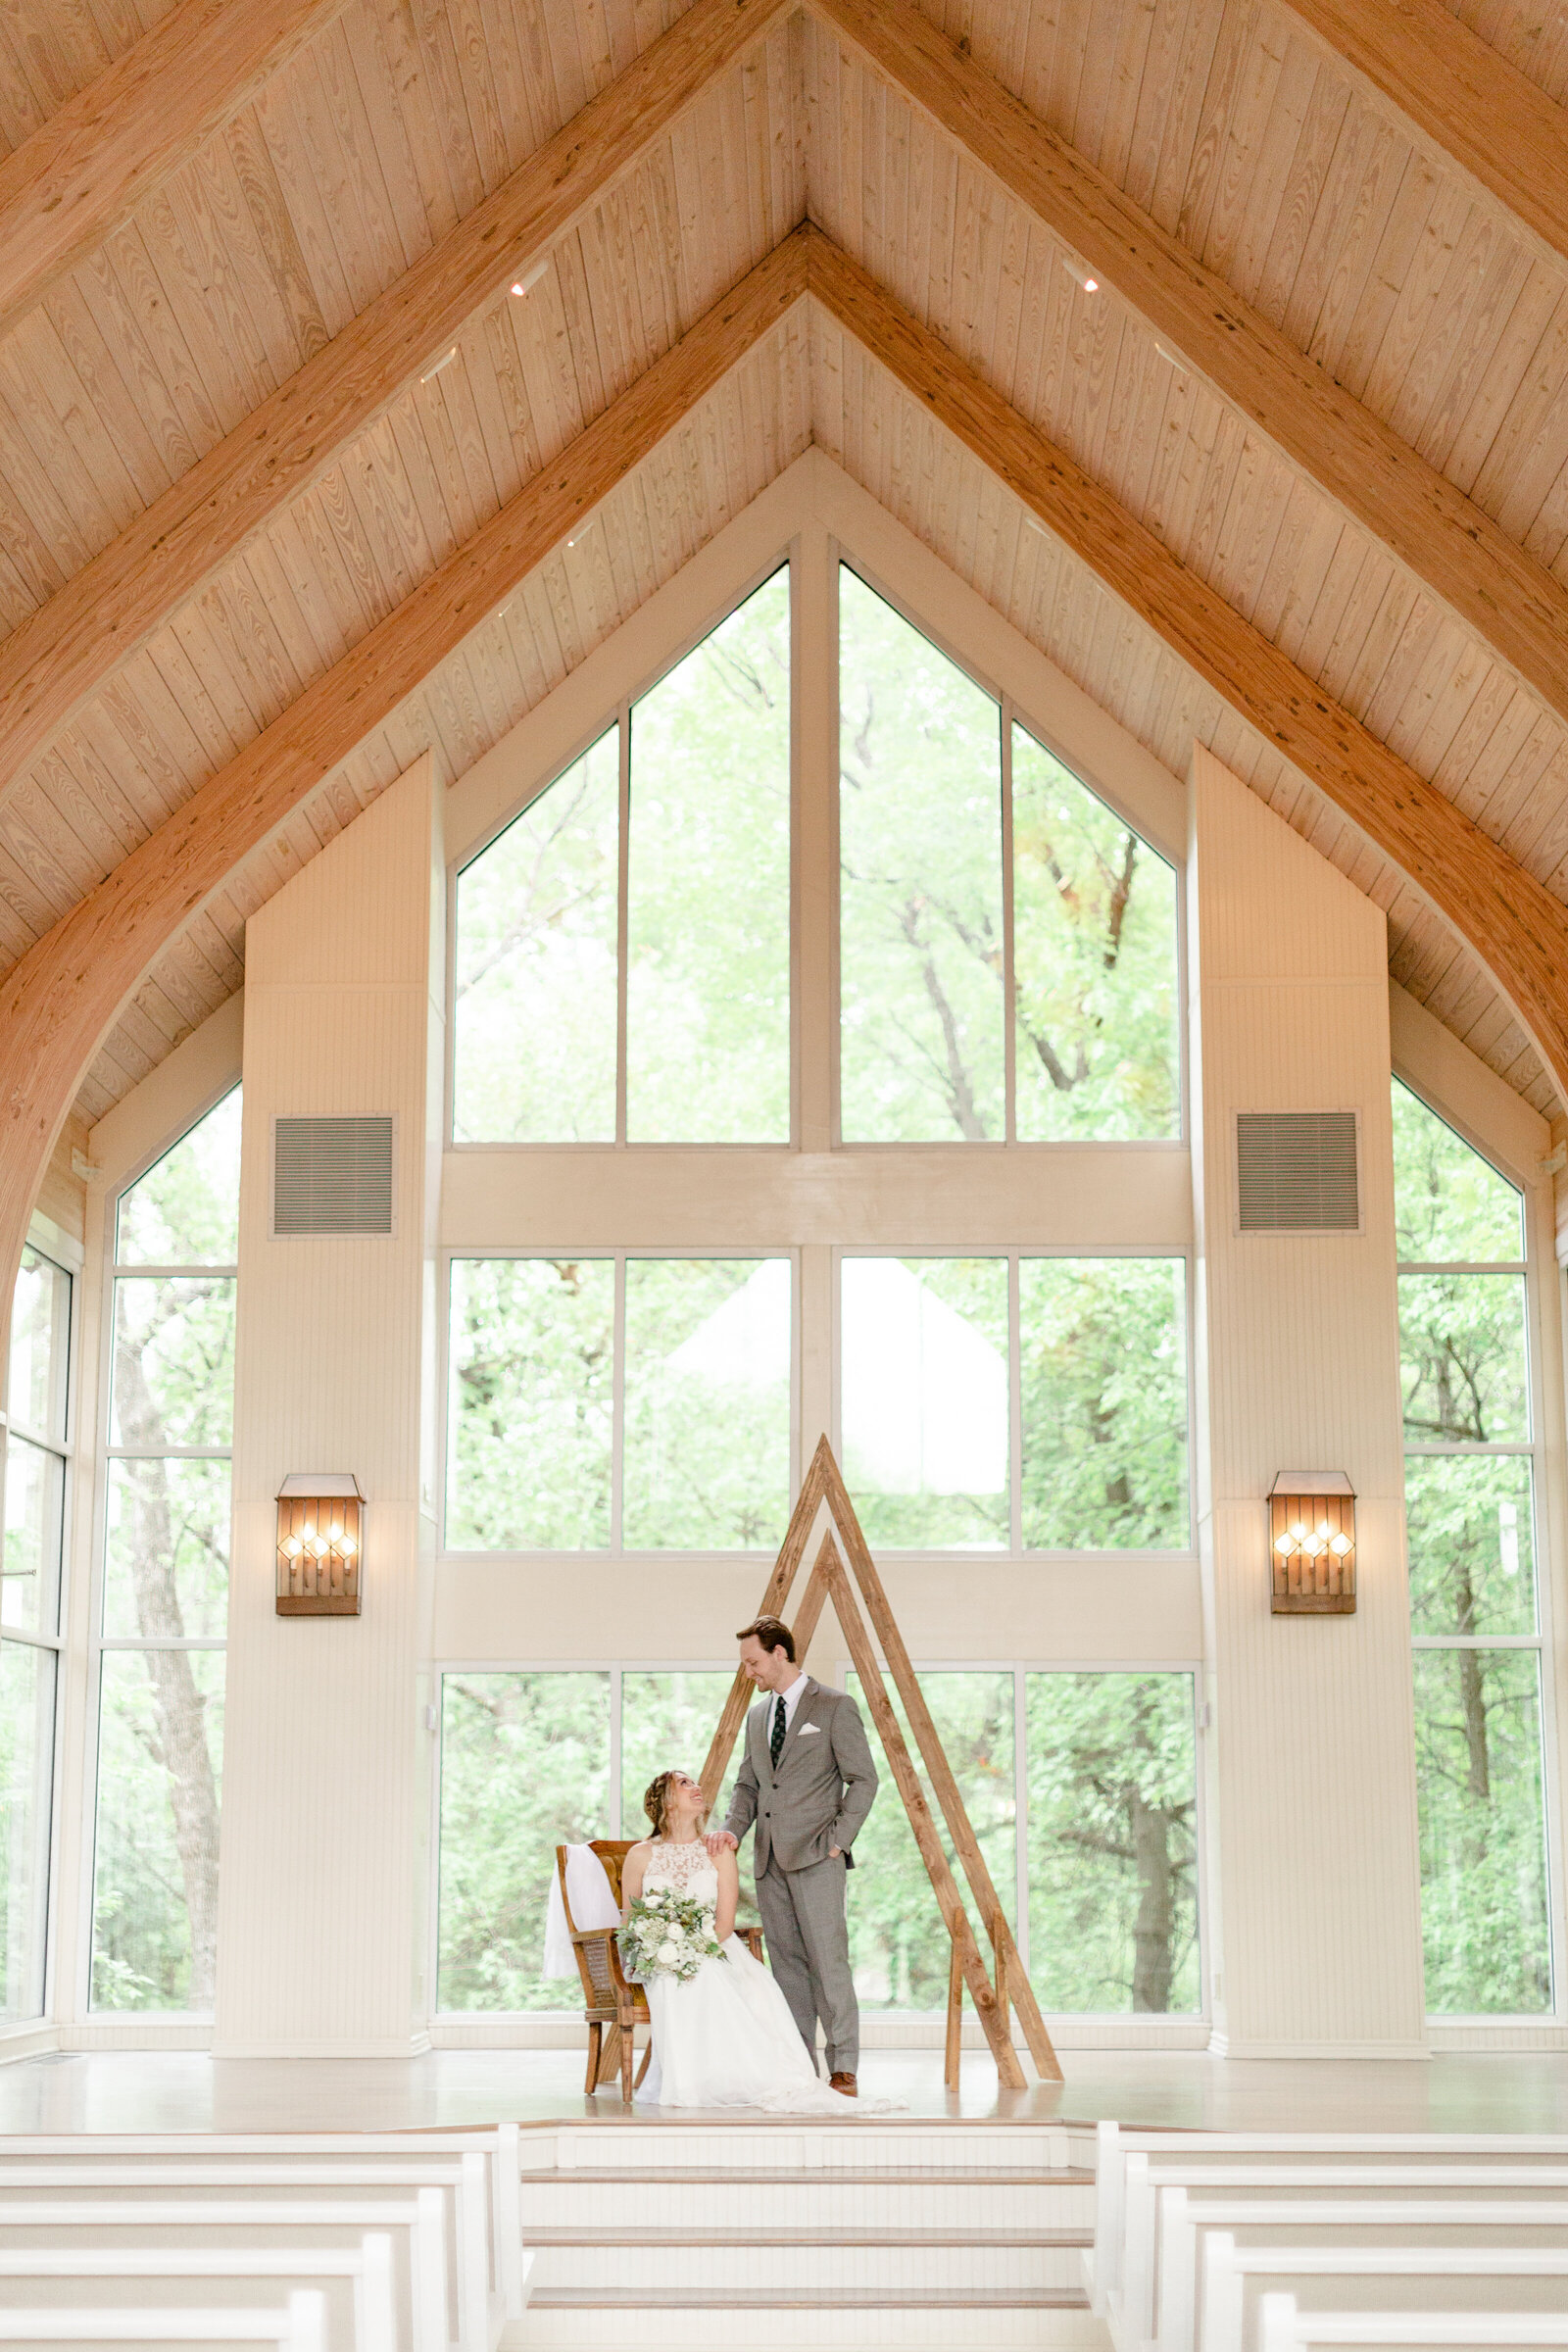 Vaulted ceilings and all glass walls surround this couples wedding ceremony.